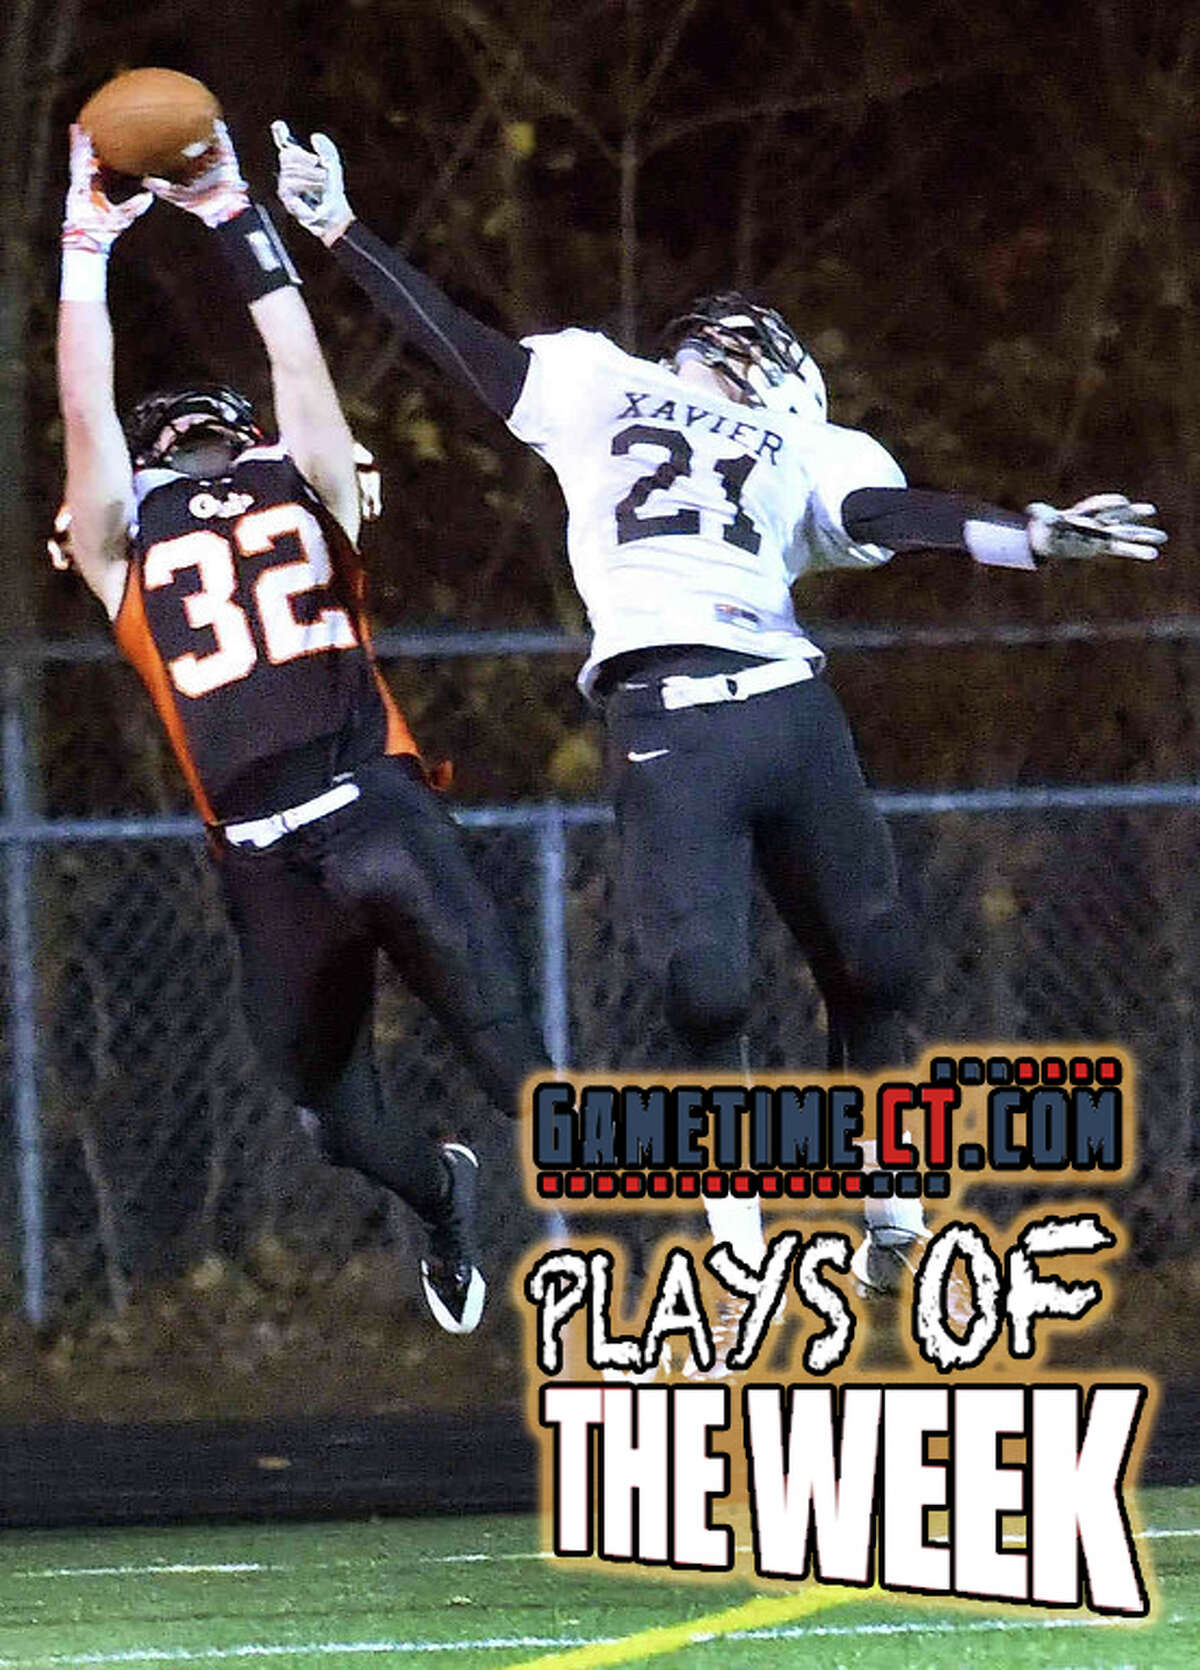 Alex Kirk catches a touchdown pass from Mark Piccirillo in Shelton’s 28-20 victory over Xavier. This and a host of other great moments can bee seen on the GameTimeCT.com Plays of the Week.